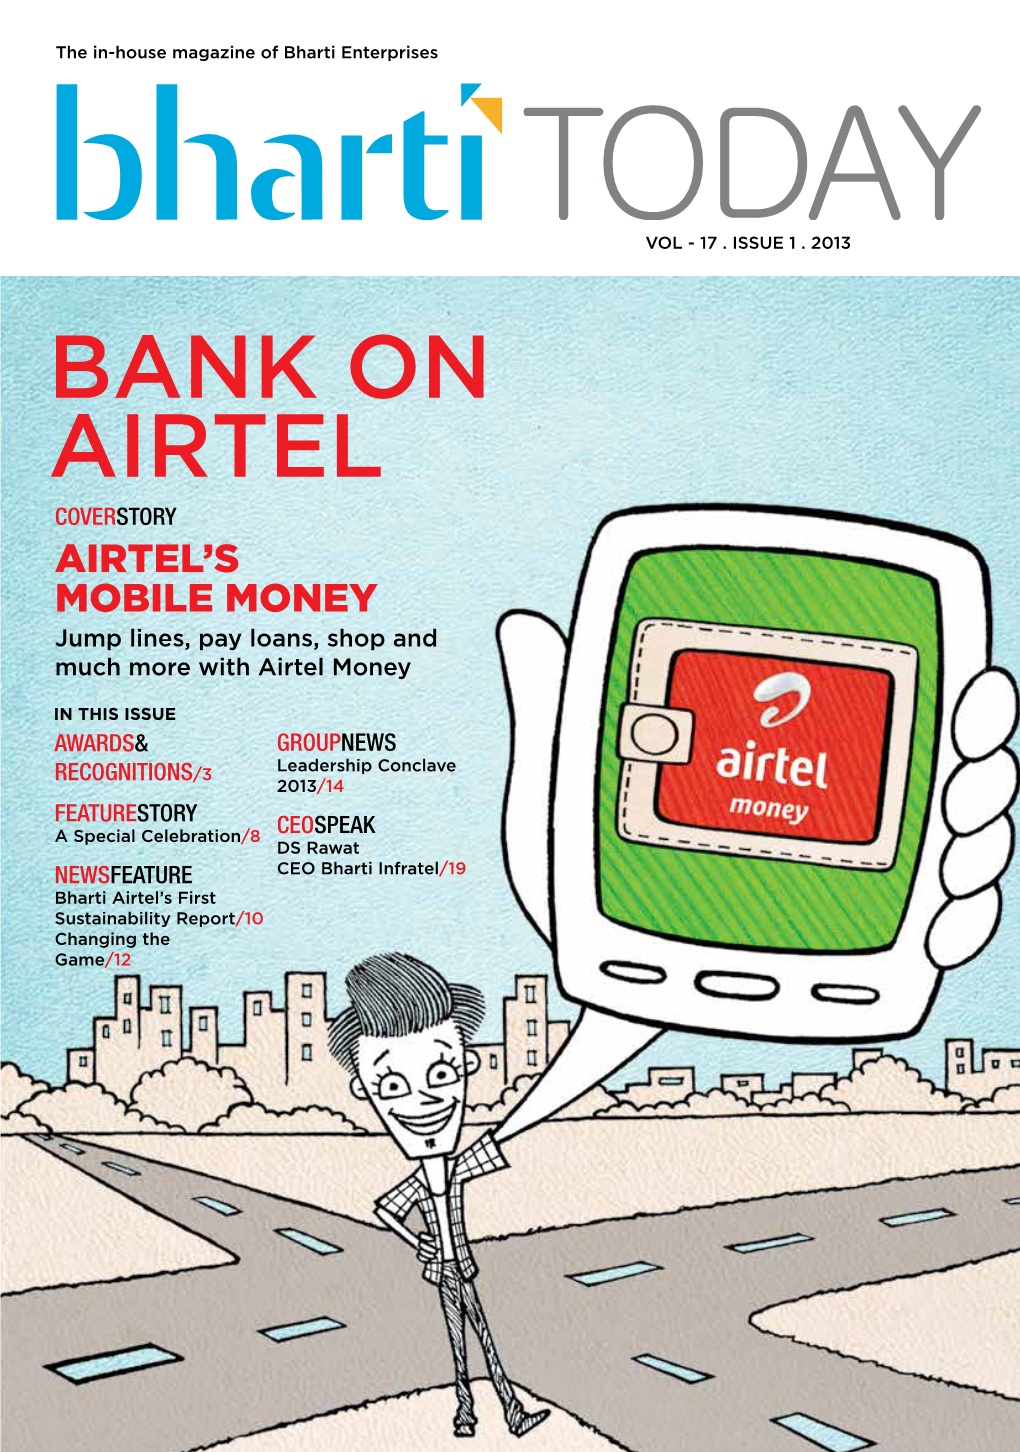 BANK on AIRTEL COVERSTORY AIRTEL’S MOBILE MONEY Jump Lines, Pay Loans, Shop and Much More with Airtel Money